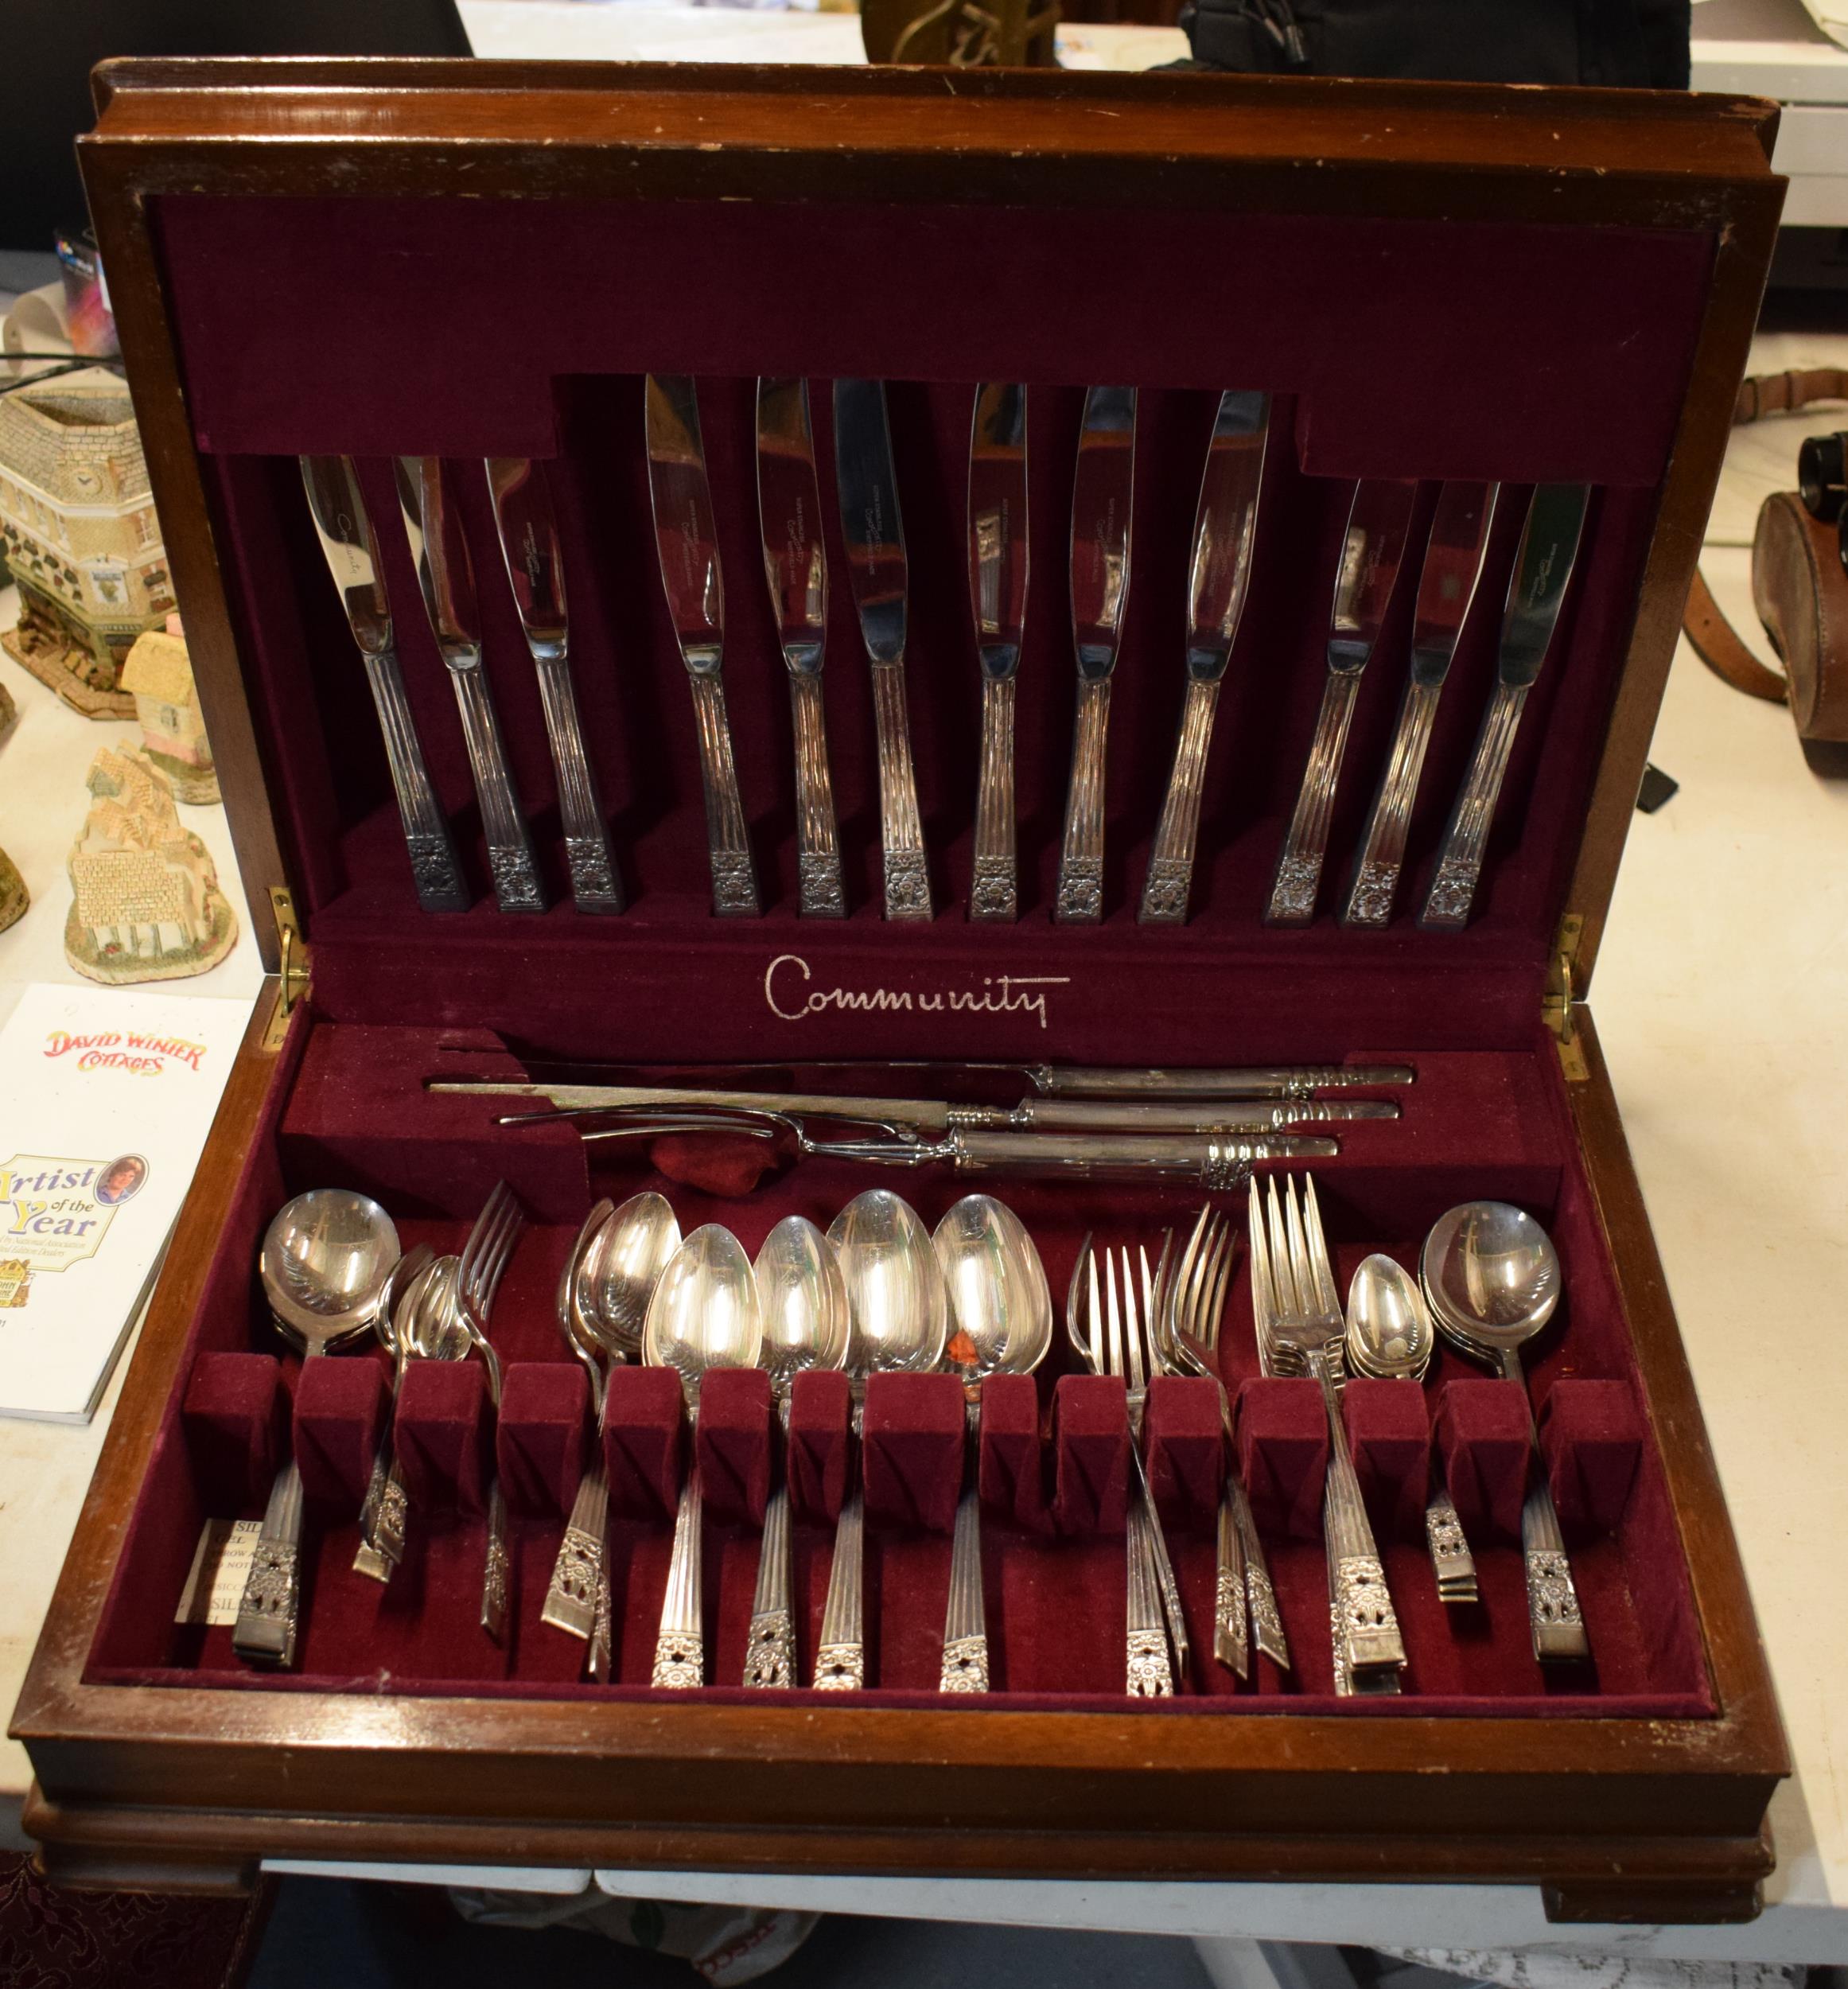 A wooden-cased Community cutlery canteen. 48 x 33 x 12cm.